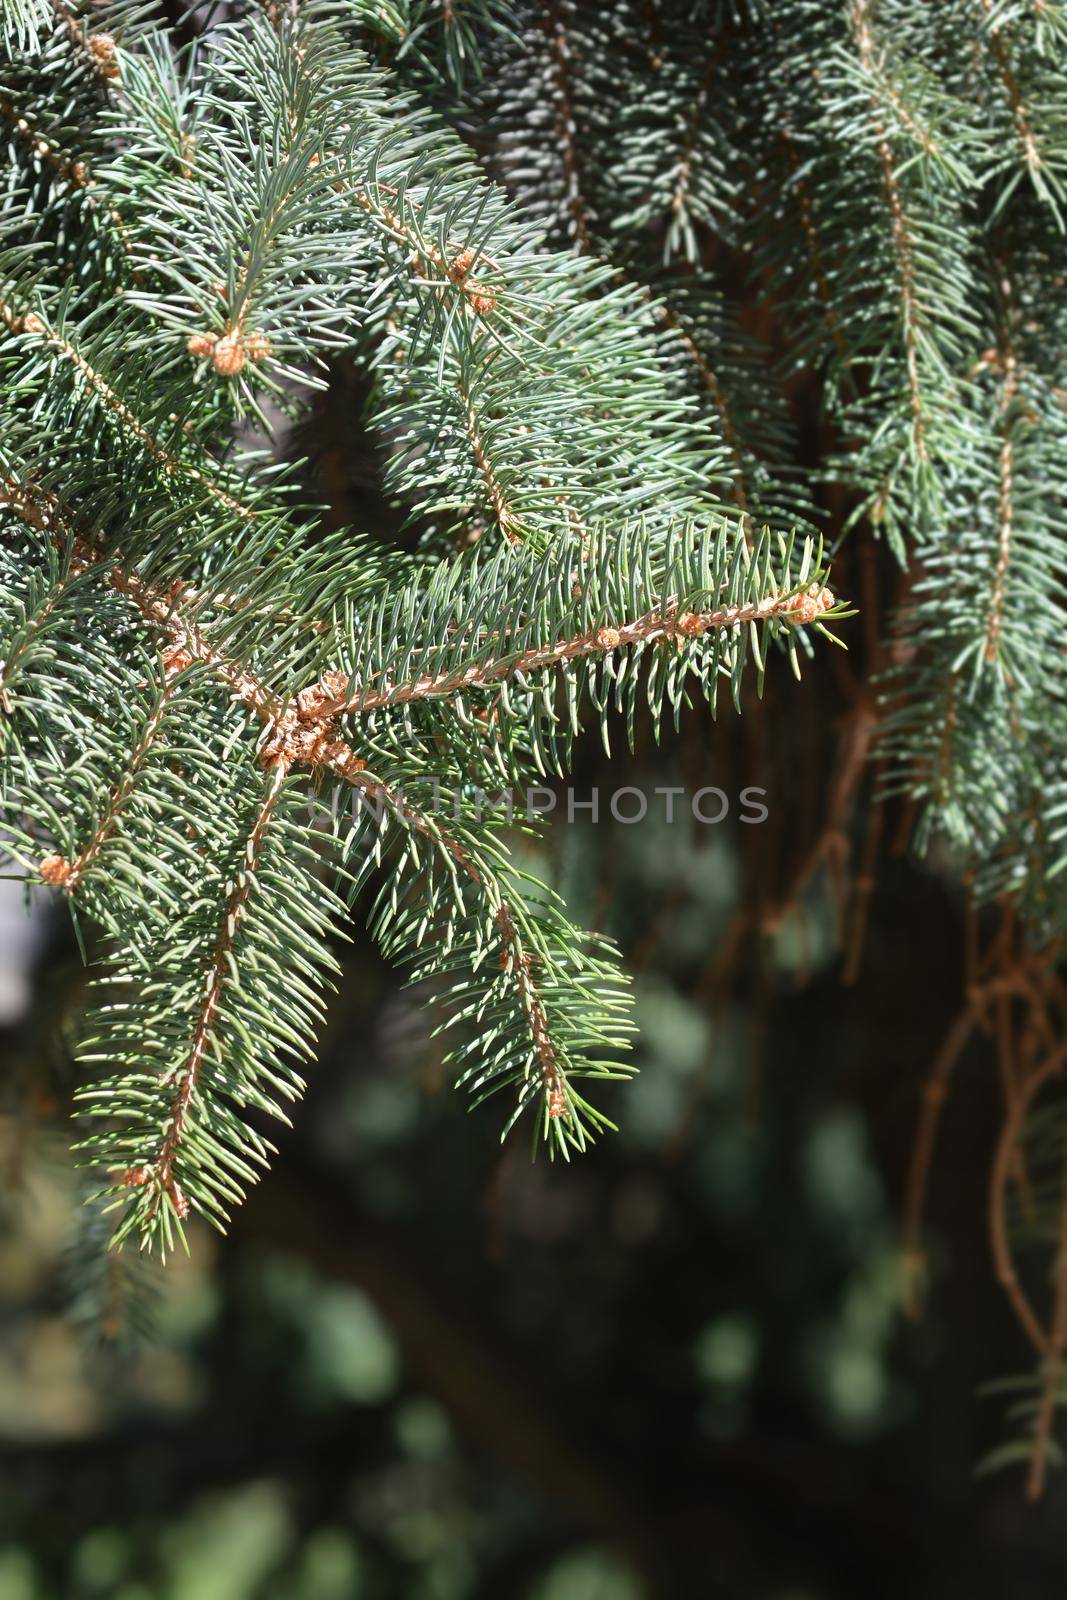 Colorado blue spruce - Latin name - Picea pungens